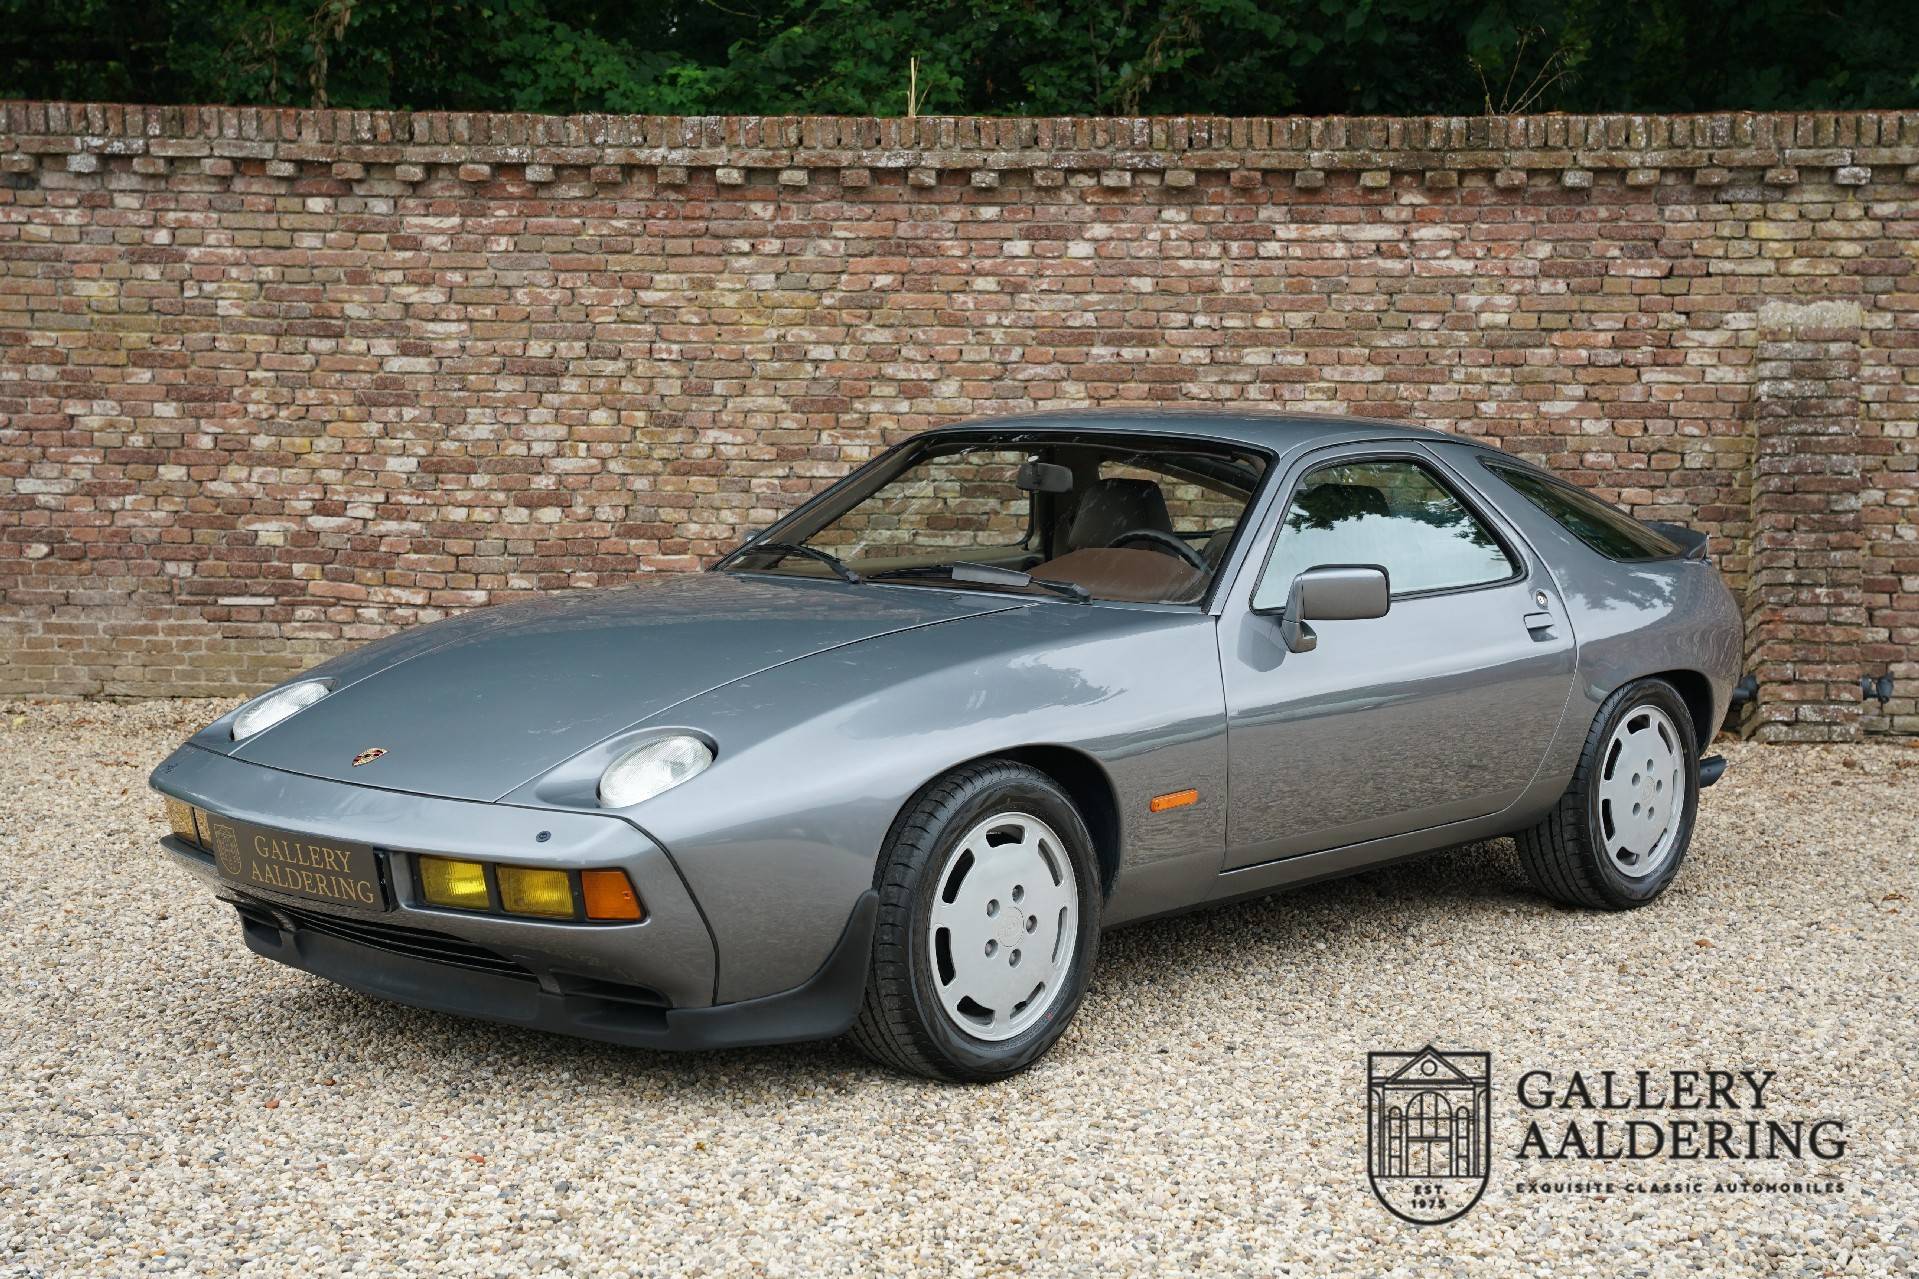 For Sale: Porsche 928 S4 (1989) offered for £44,027